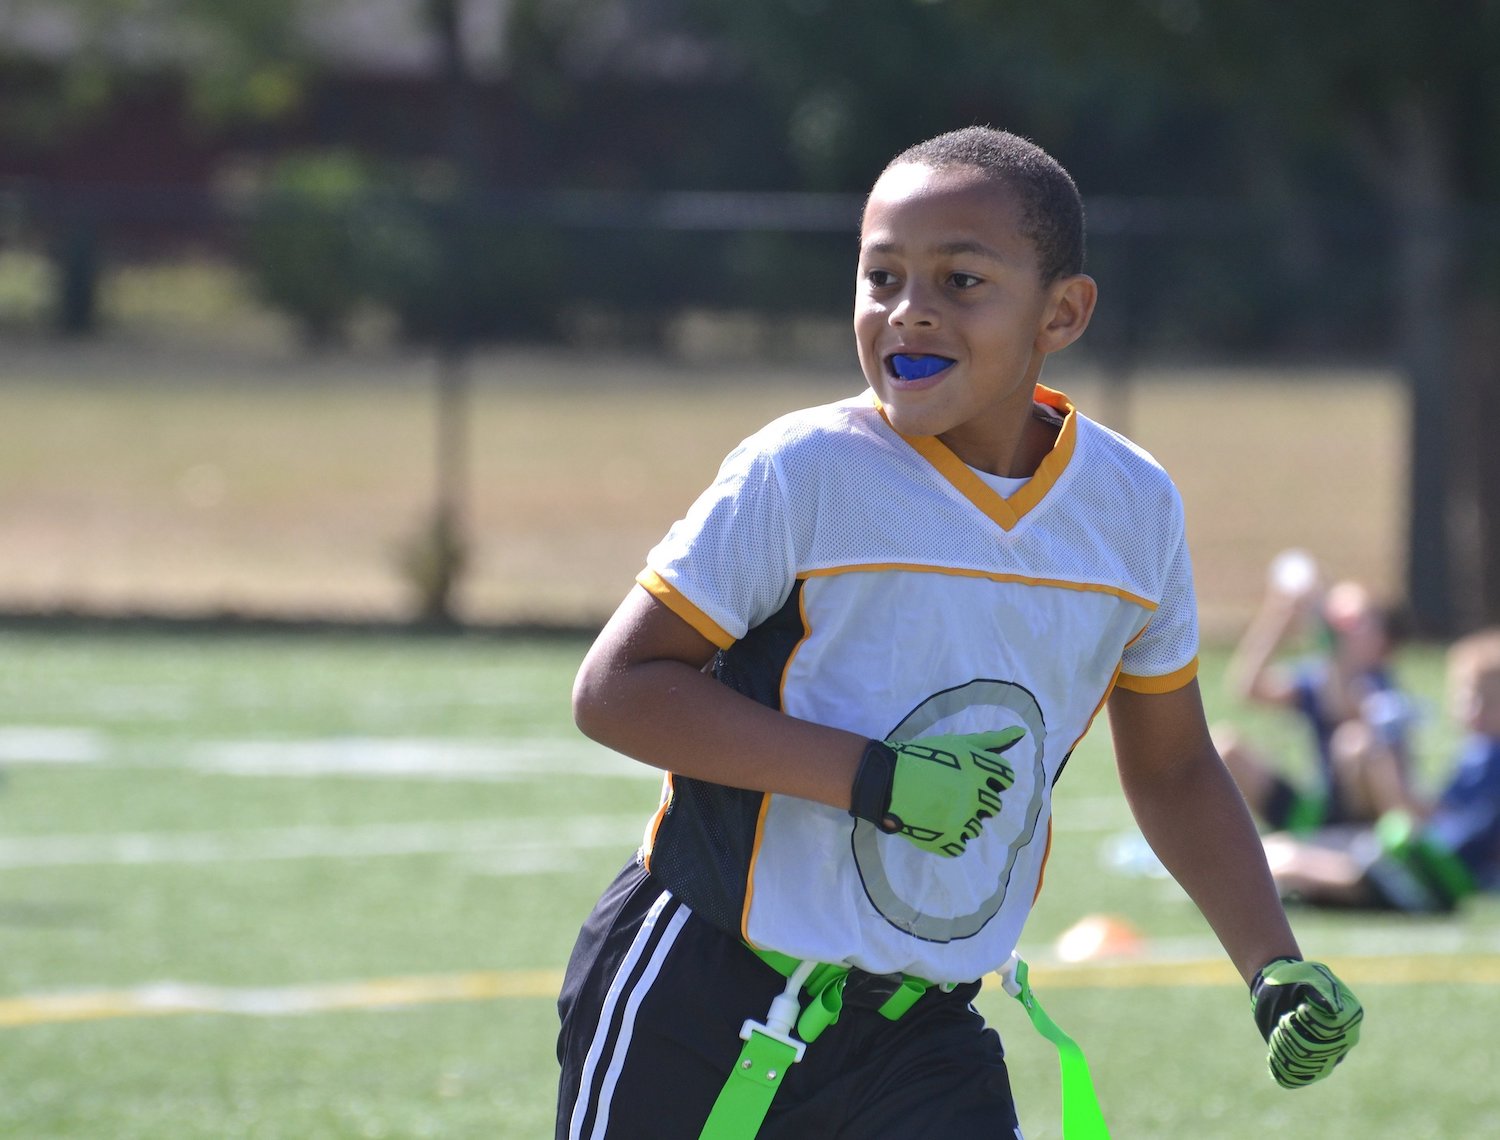 Young Black boy playing flat football while wearing an athletic mouthguard to protect his smile.